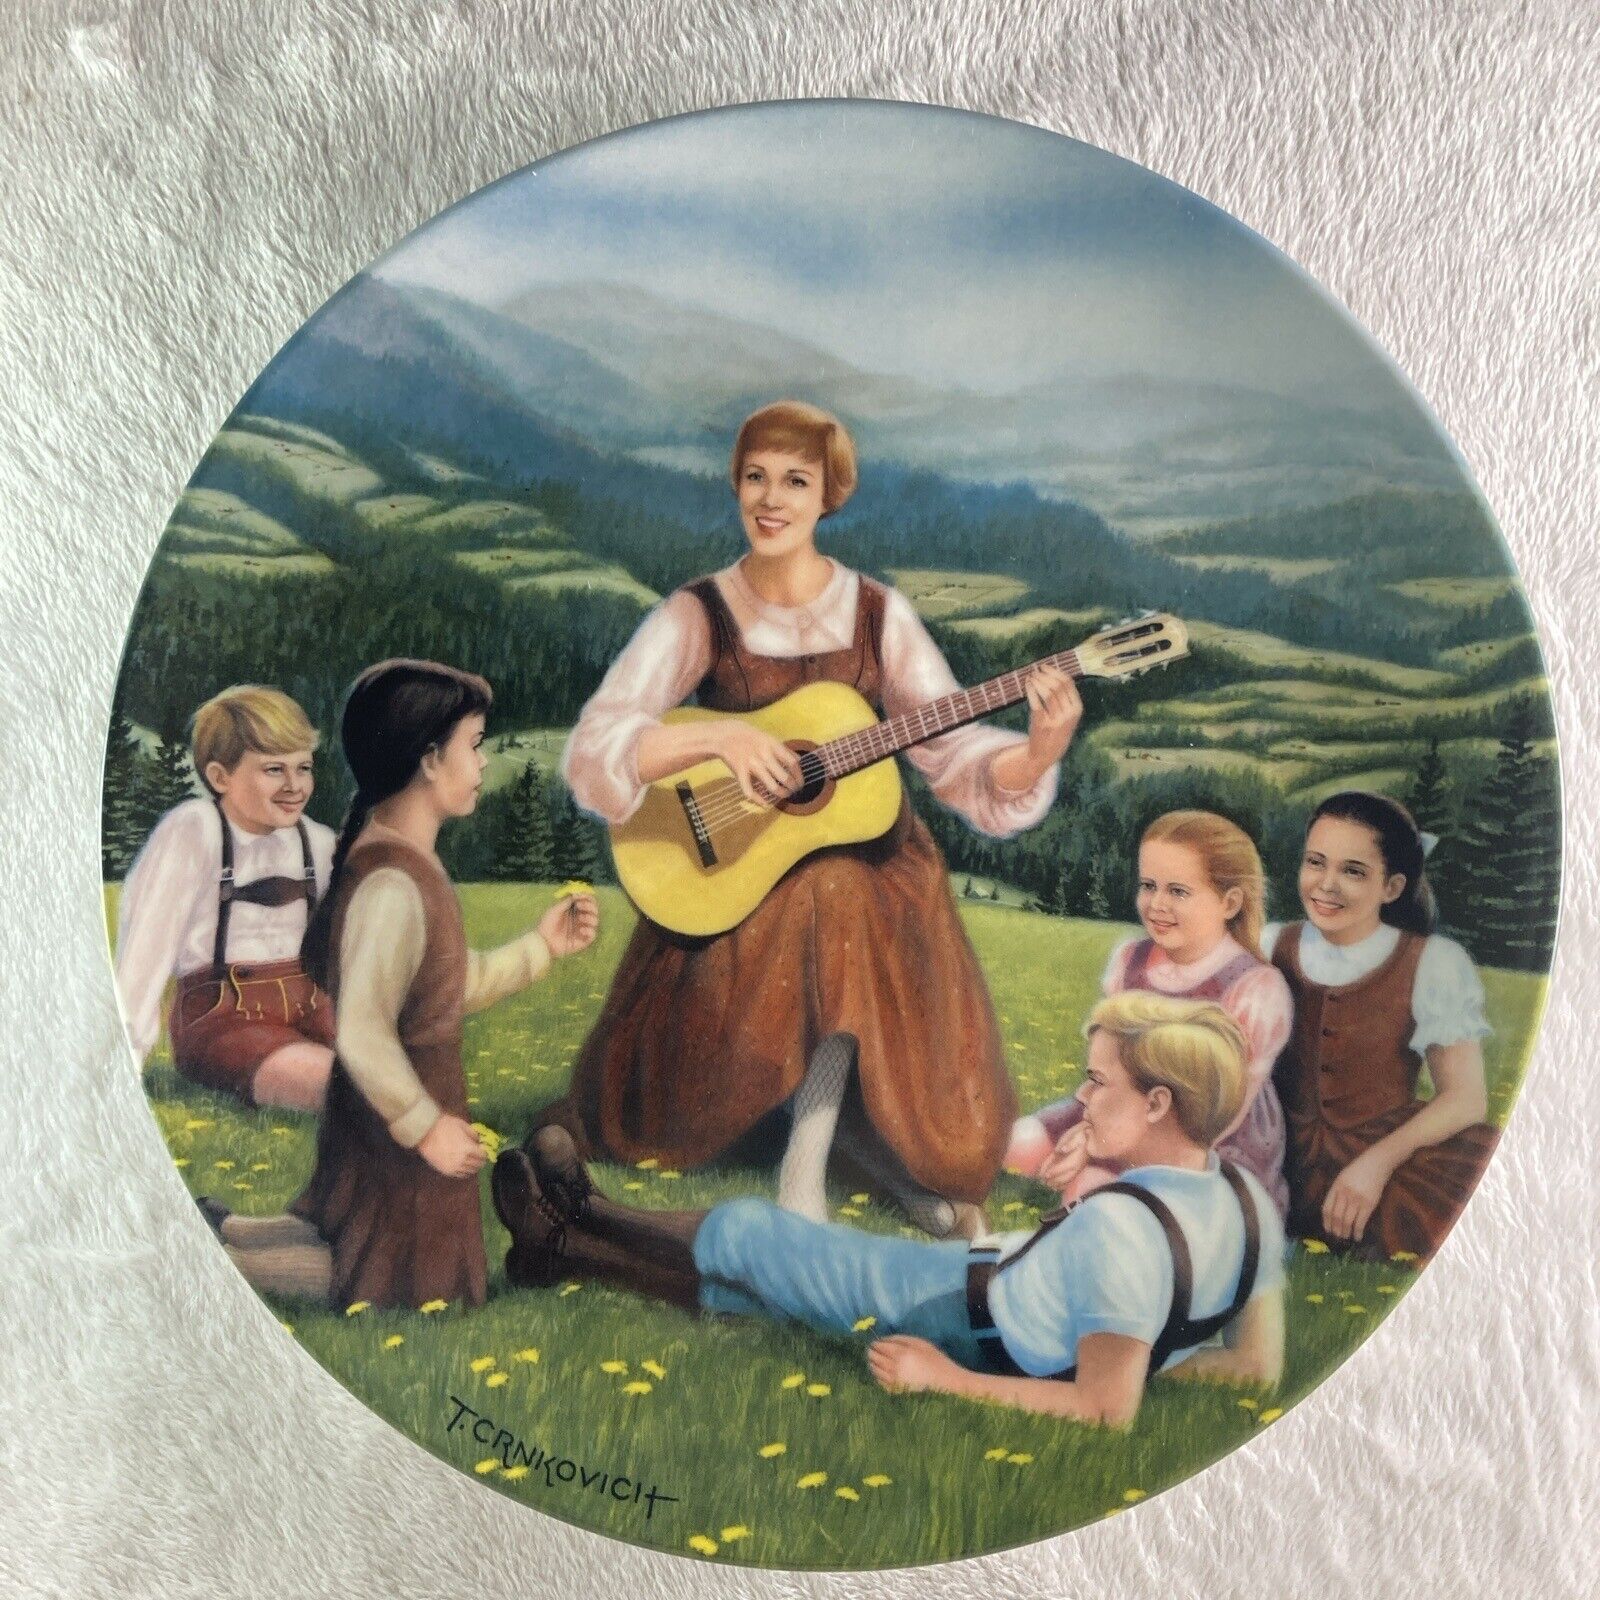 DO-RE-MI Plate The Sound of Music Musical Drama Film Knowles Maria #2 Show Tune